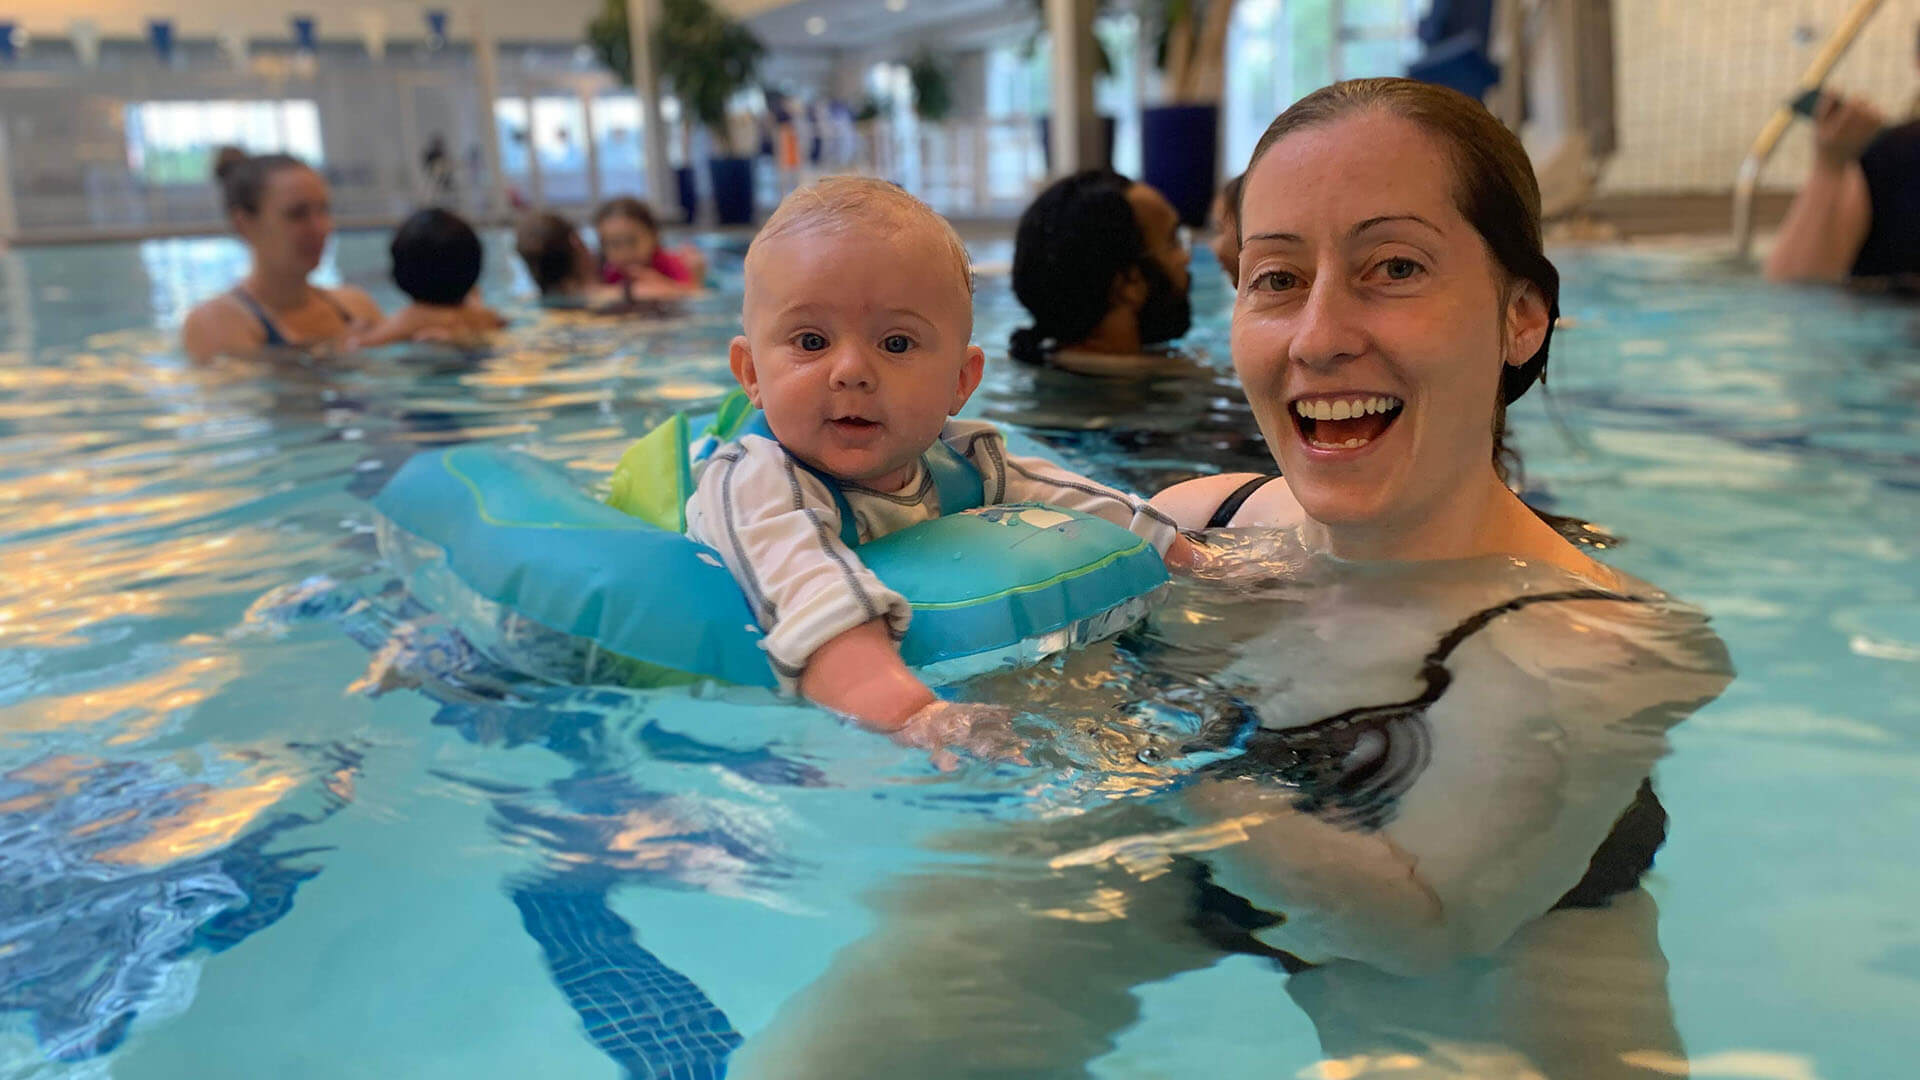 Laura smiles in a swimming pool while holding her 3-year-old son.